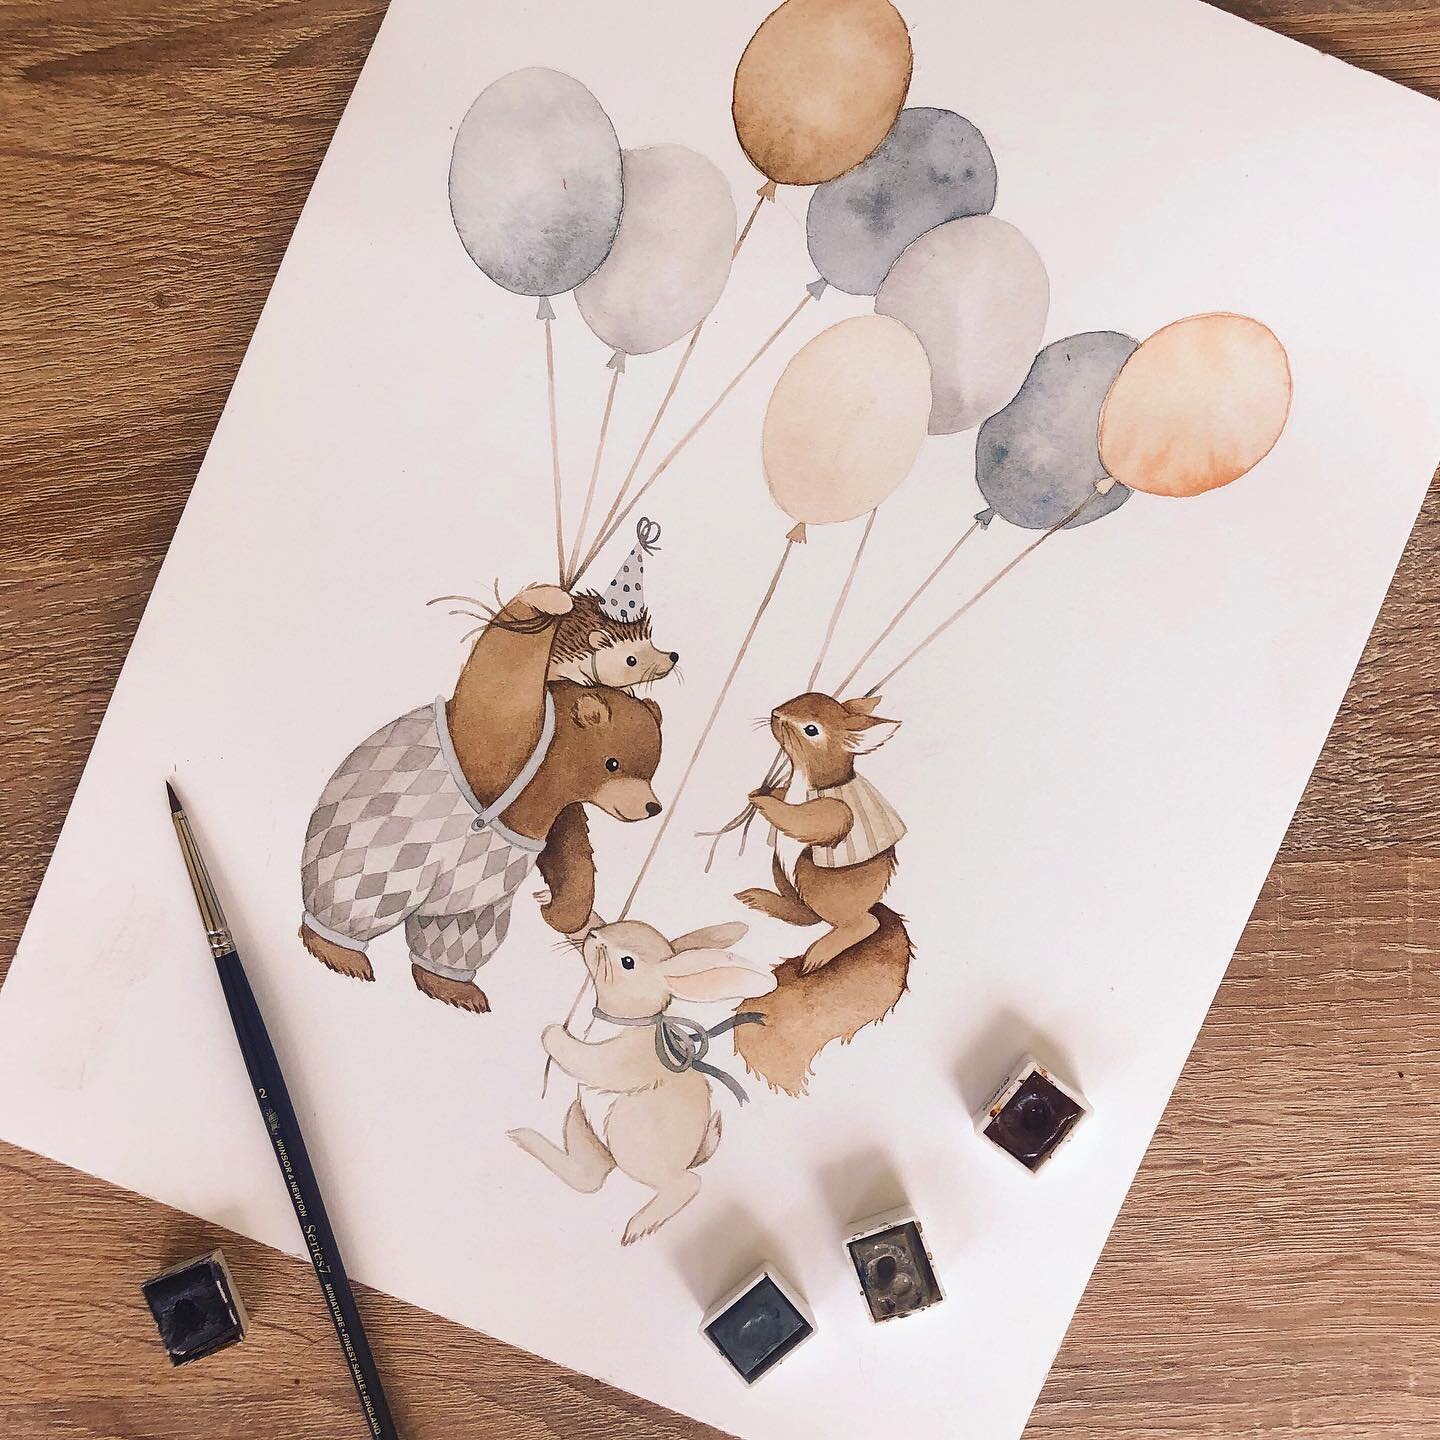 Happy Monday 🤍loves! Played around with a more subtle, vintage, neutral palette tones today while redrawing a piece from the past 🎈. I got this idea from @cecile_illustration whom I admire a lot💛! When I have a few spare hours during projects I lo